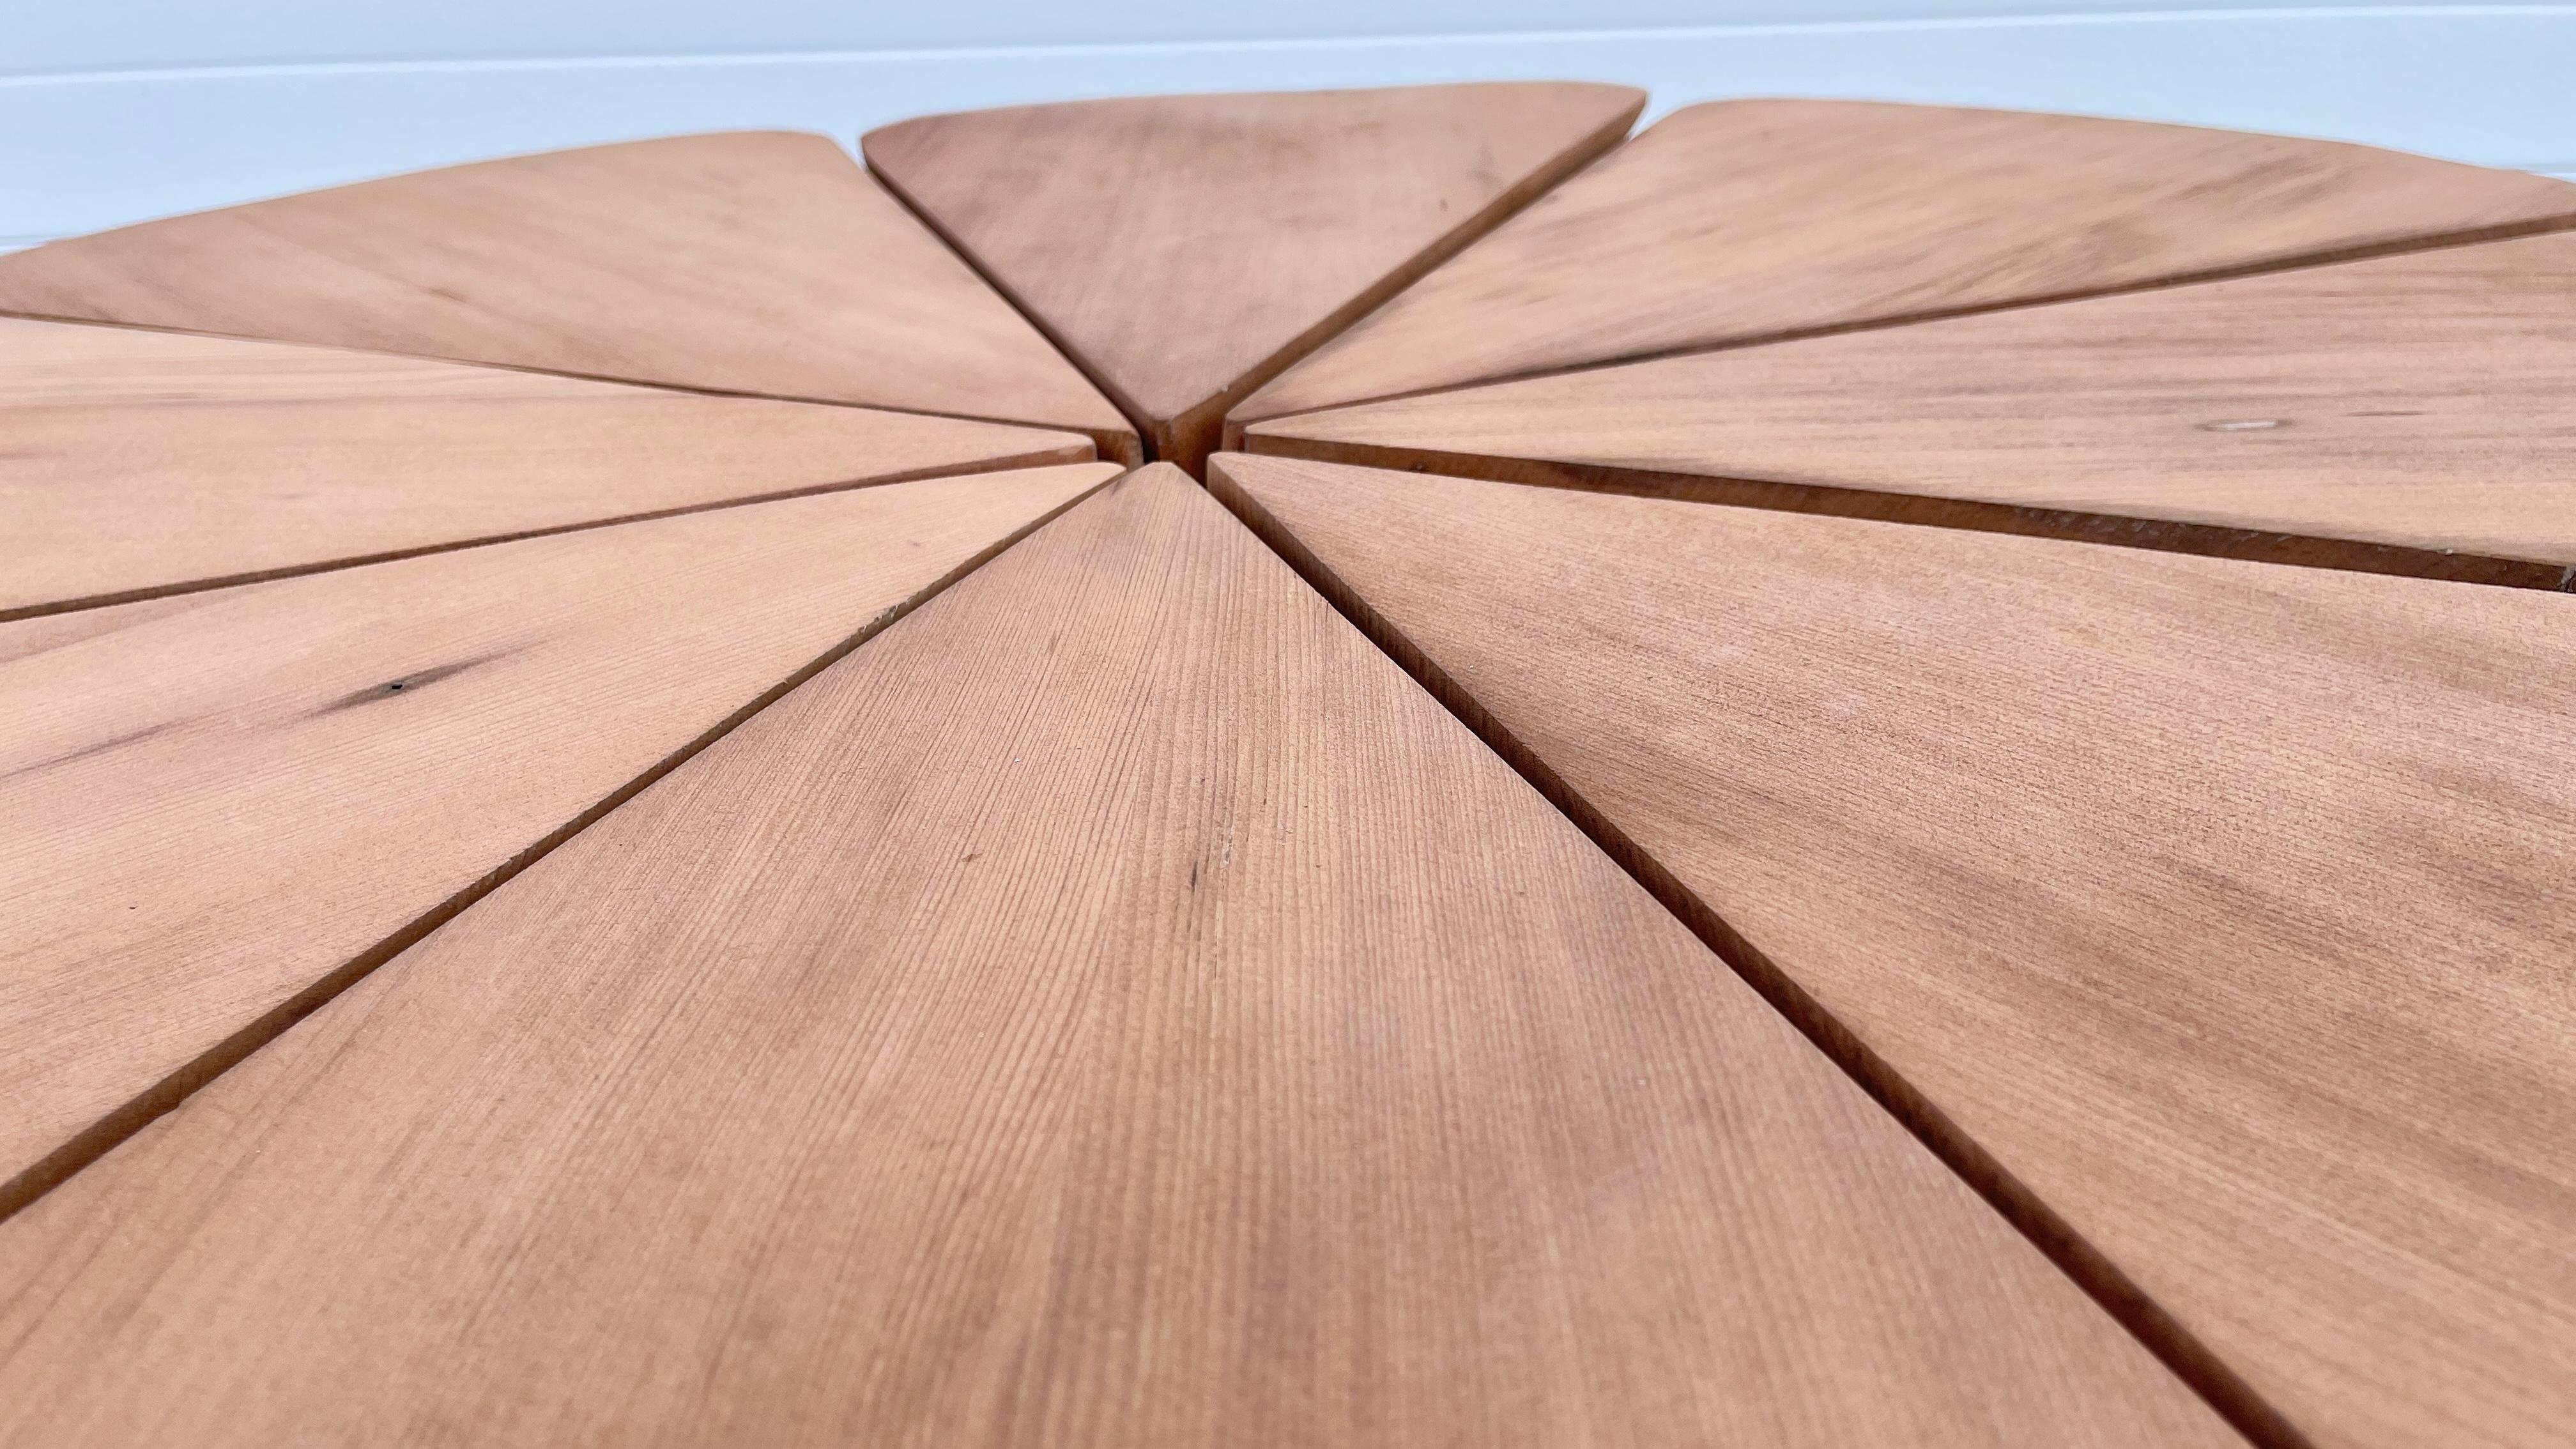 1961 Petal Dining Table by Richard Schultz for Knoll in California Redwood For Sale 2